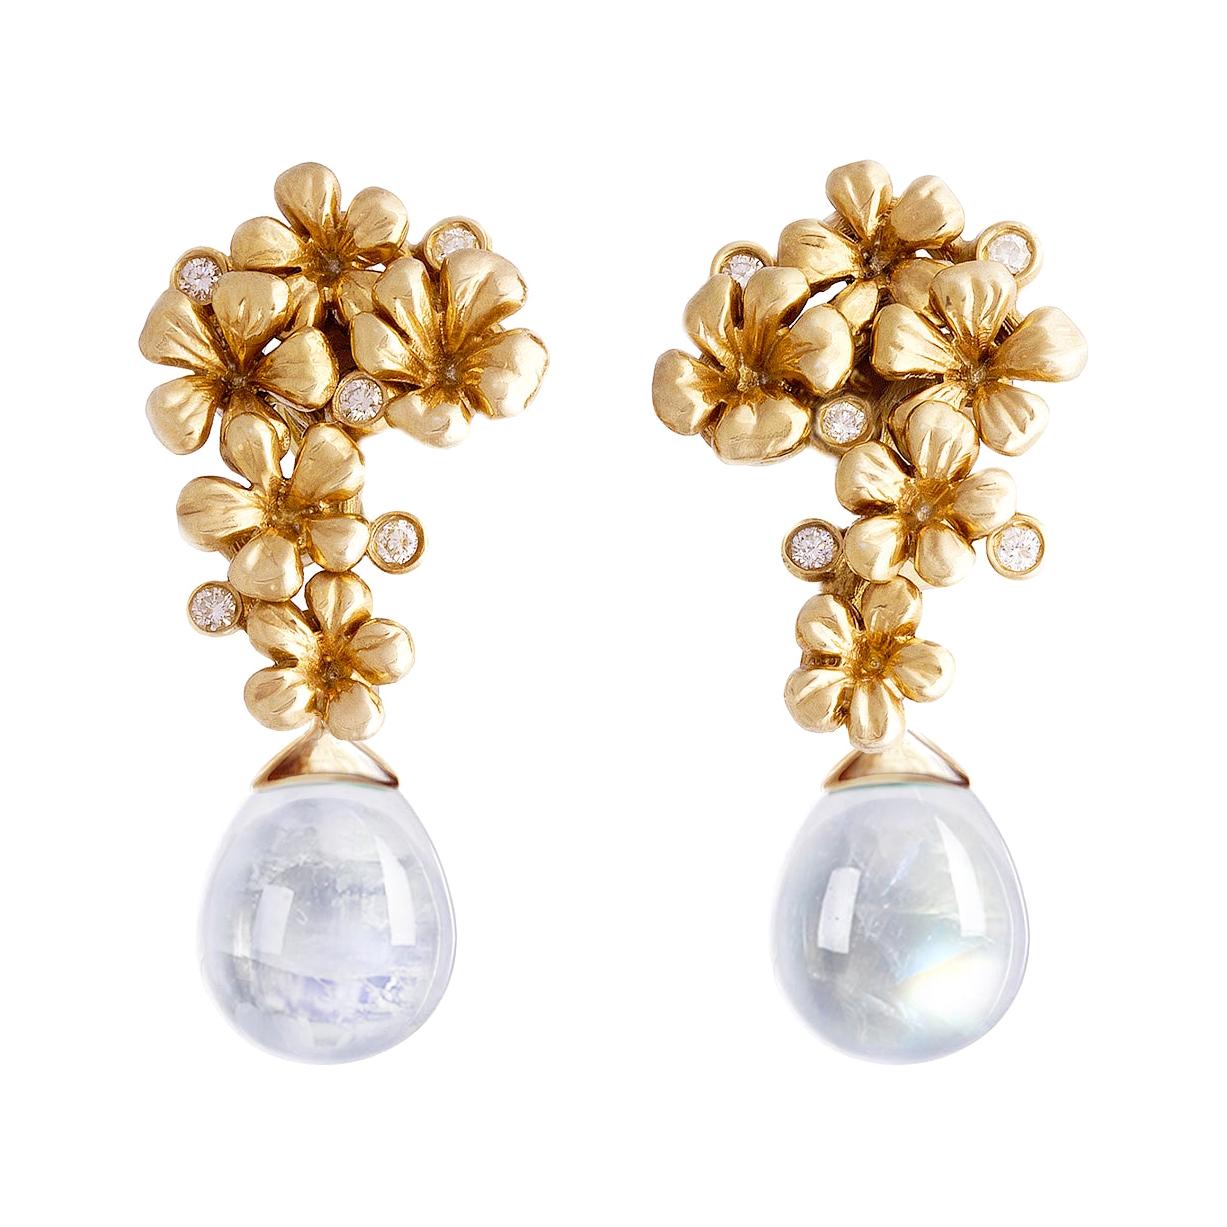 18 Karat Yellow Gold Cocktail Clip-On Earrings with Diamonds and Moonstones